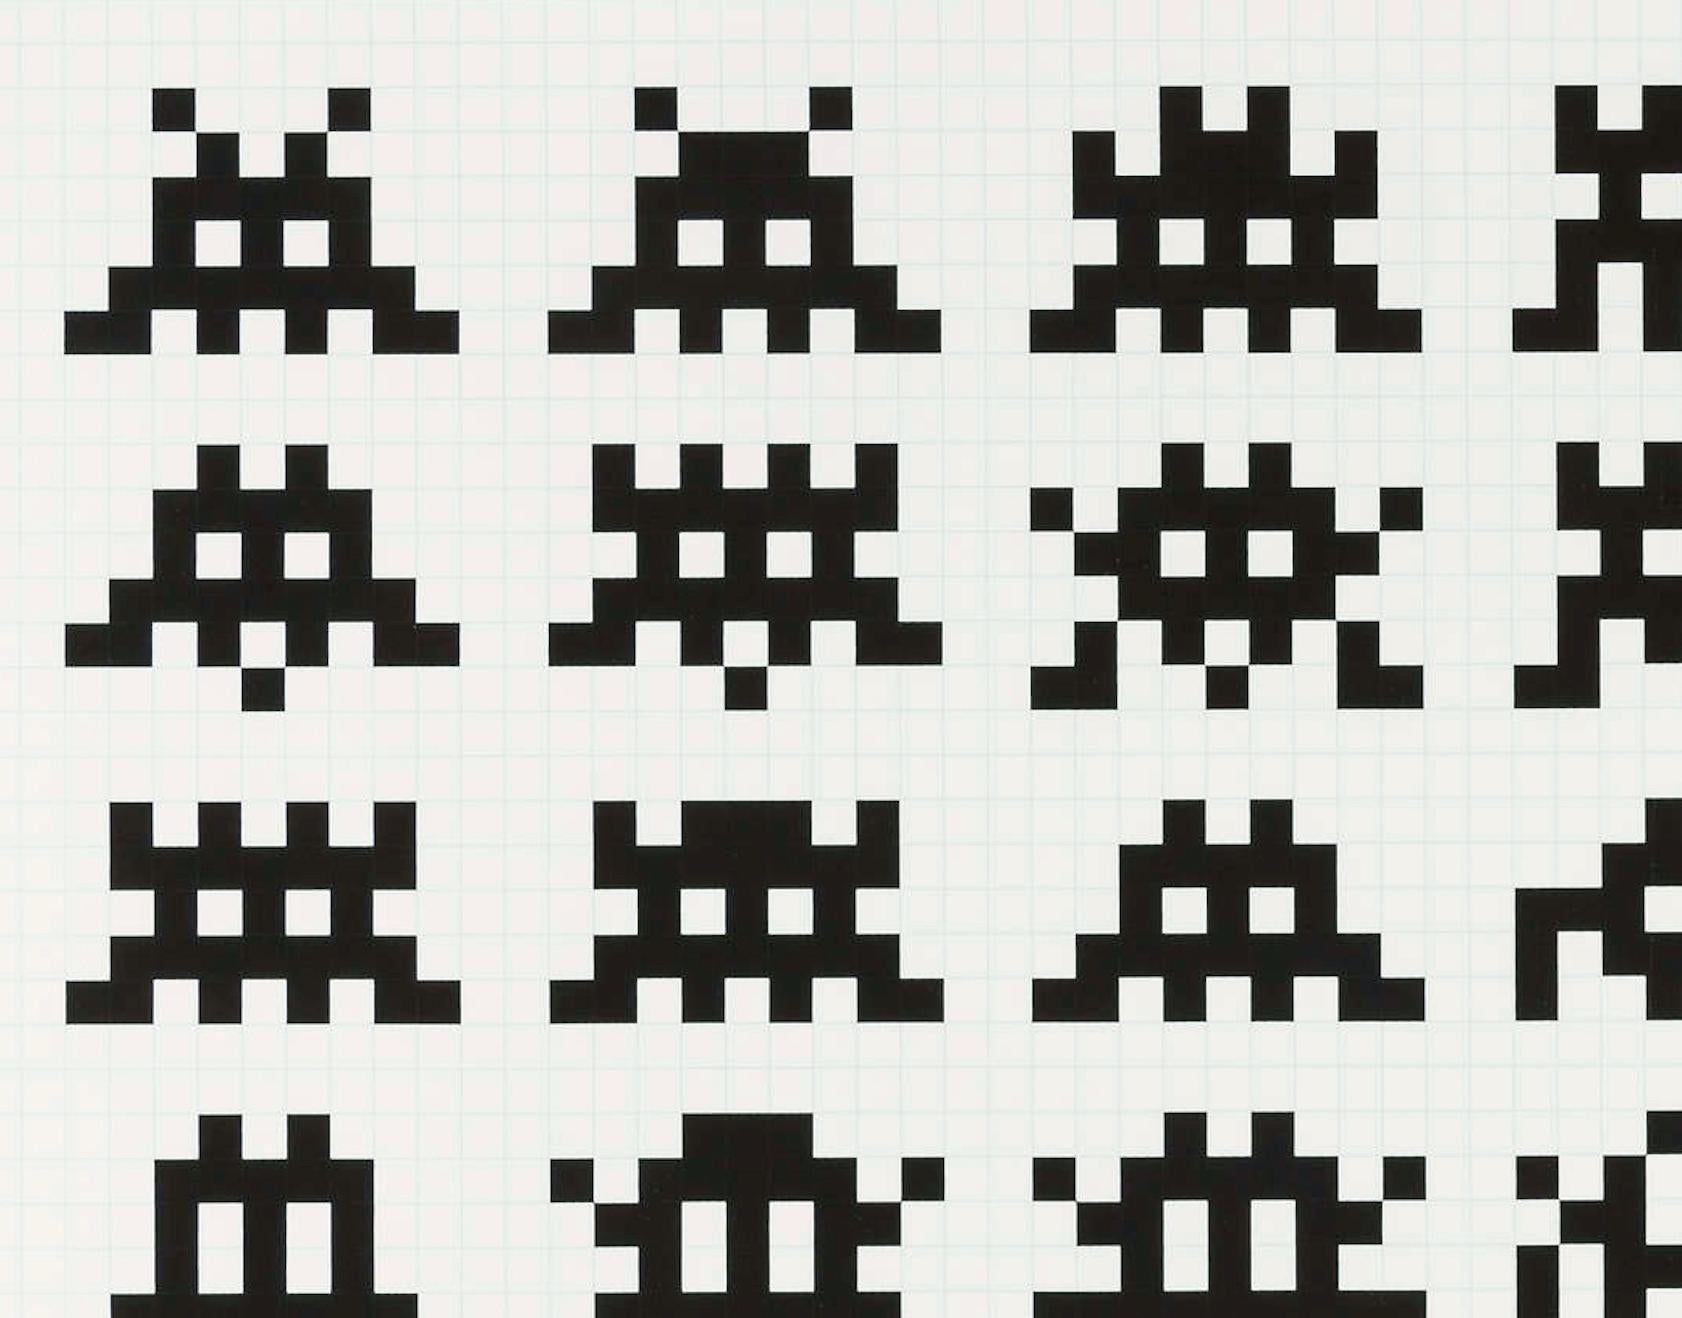 Repetition Variation Evolution - Contemporary Art, Urban, Street Art, Space - Print by Invader